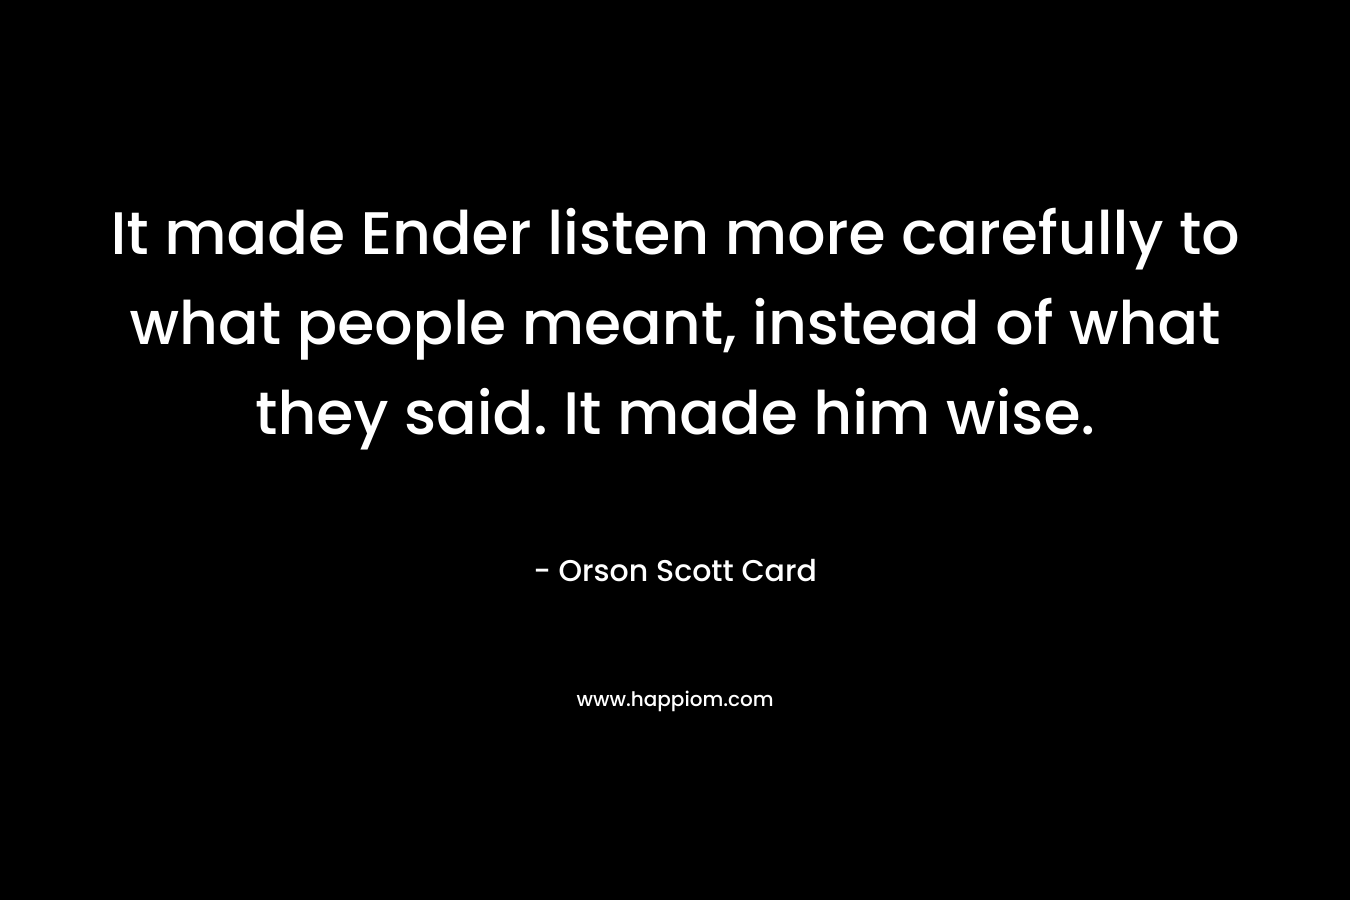 It made Ender listen more carefully to what people meant, instead of what they said. It made him wise. – Orson Scott Card